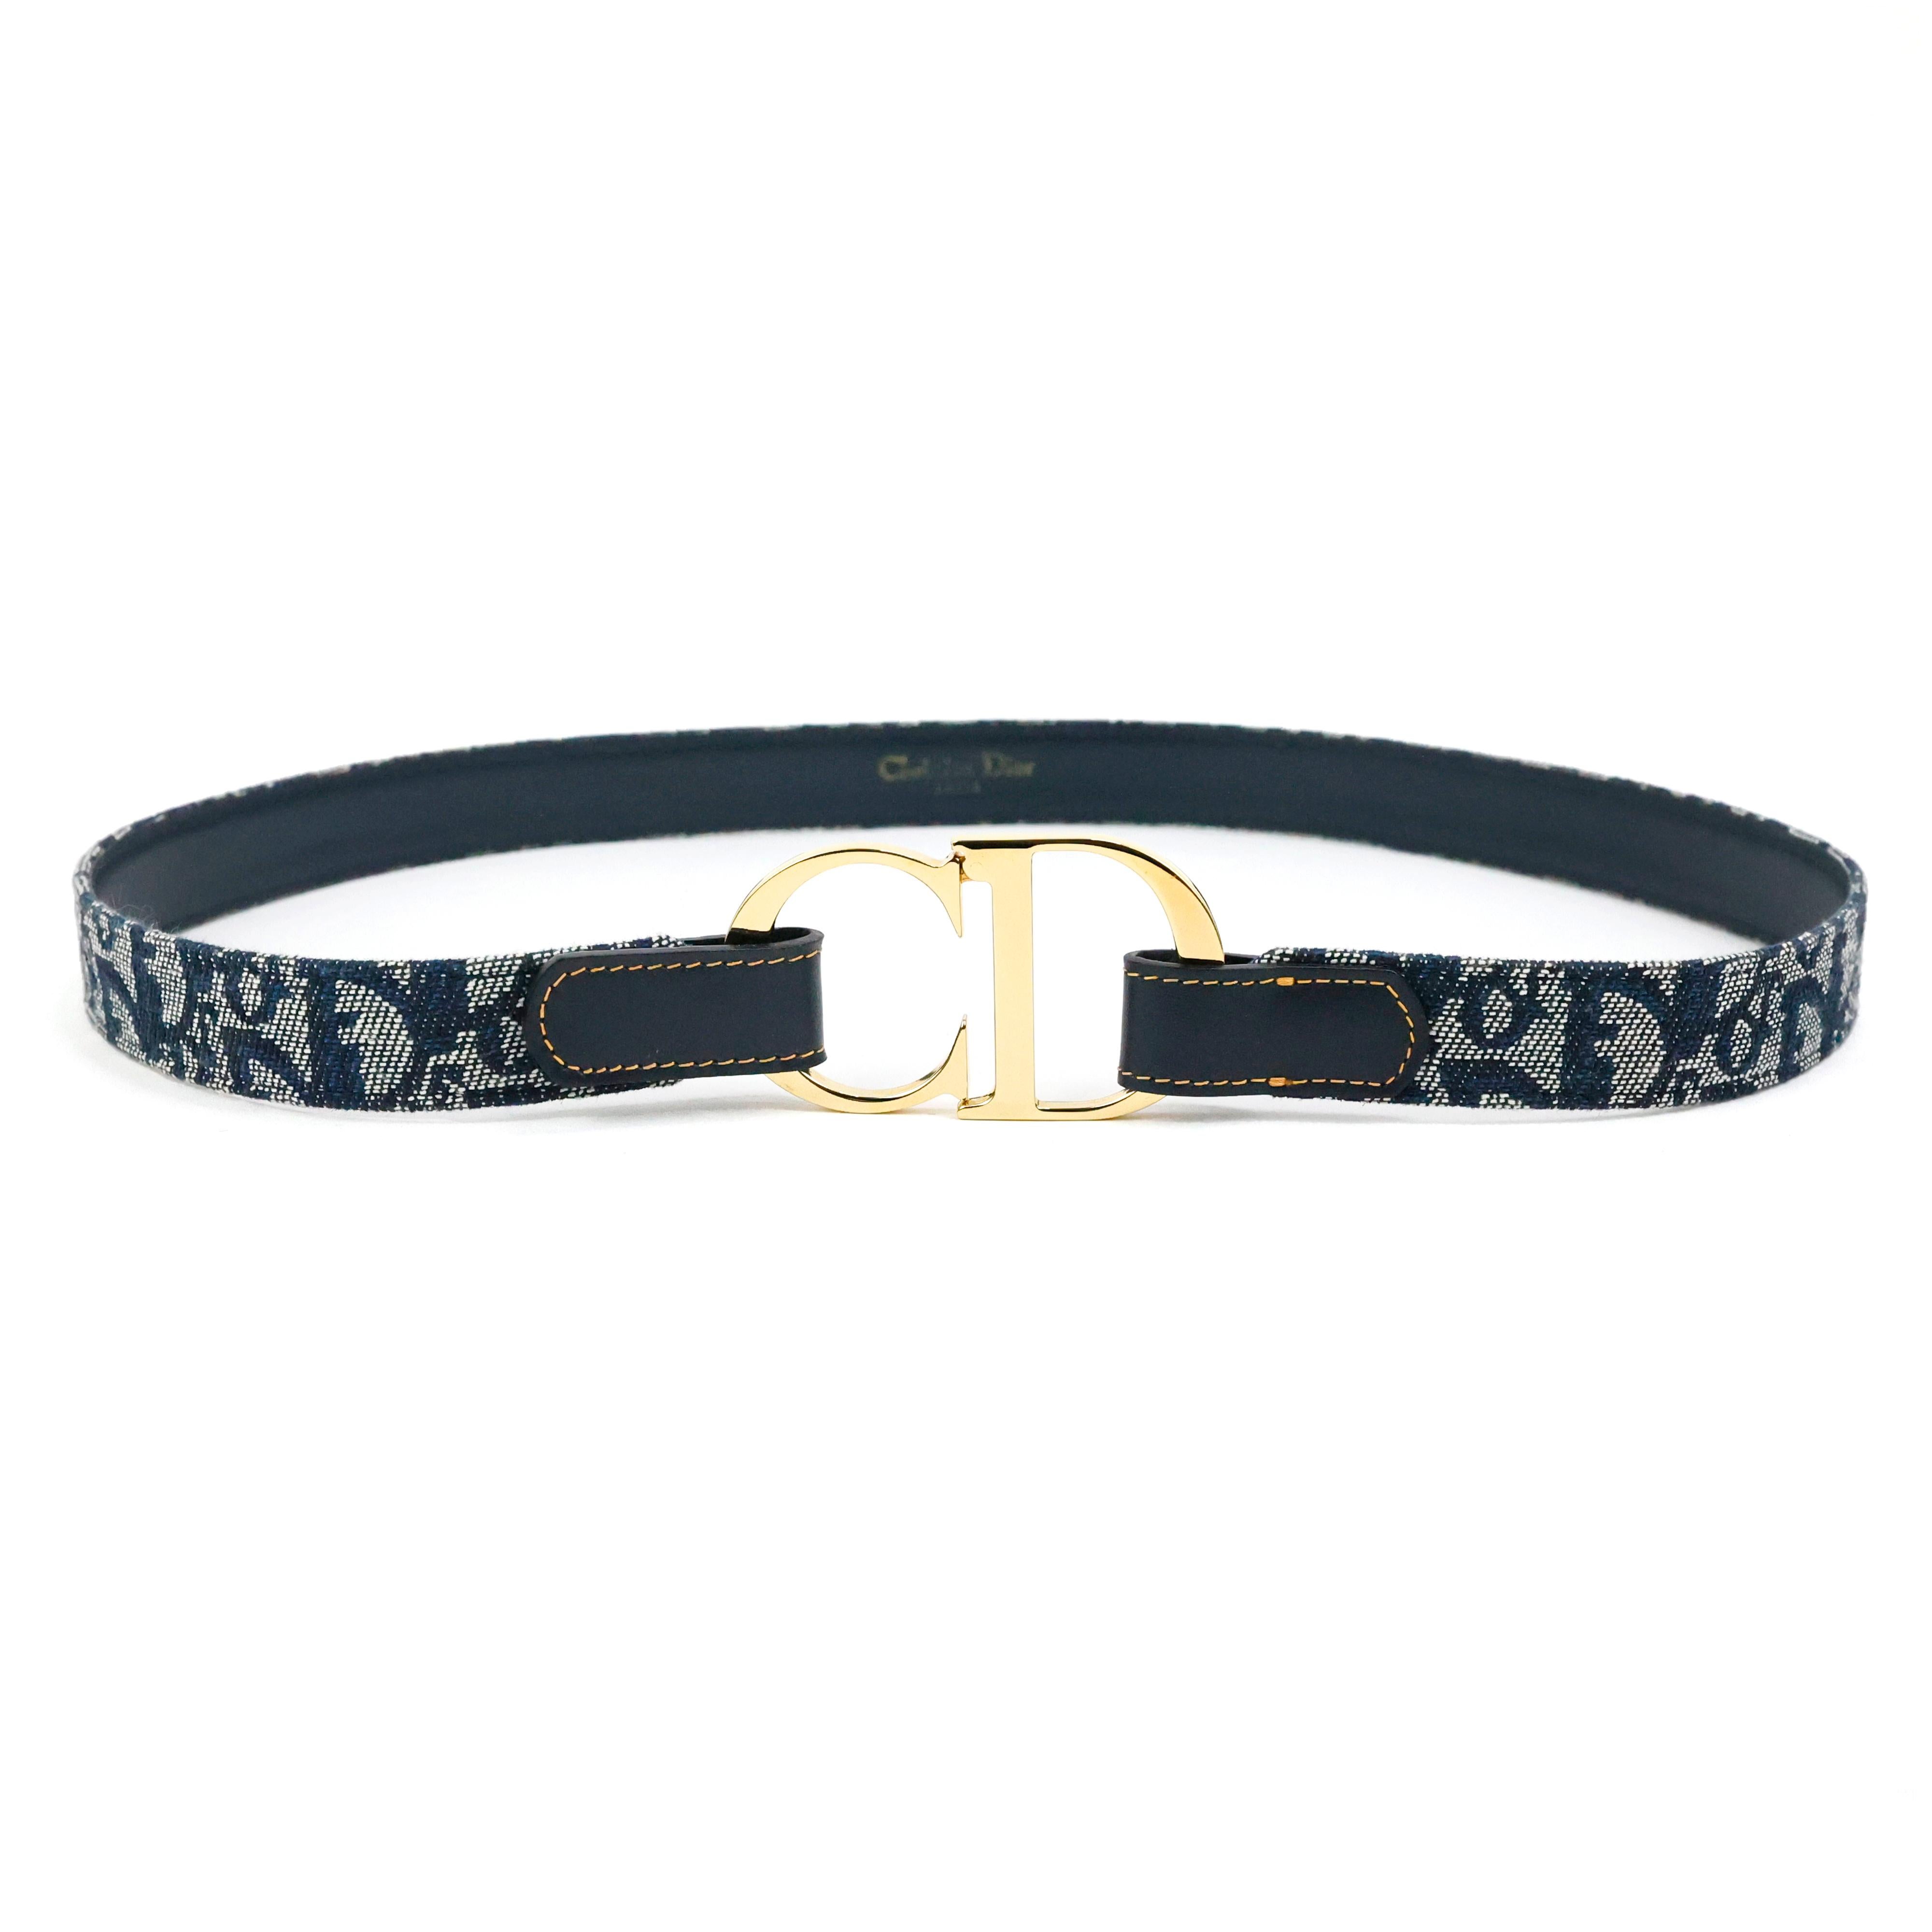 Christian Dior by John Galliano CD logo belt in blue diorissimo monogram and leather, gold hardware. Size 80cm.



Condition:

Really good.

